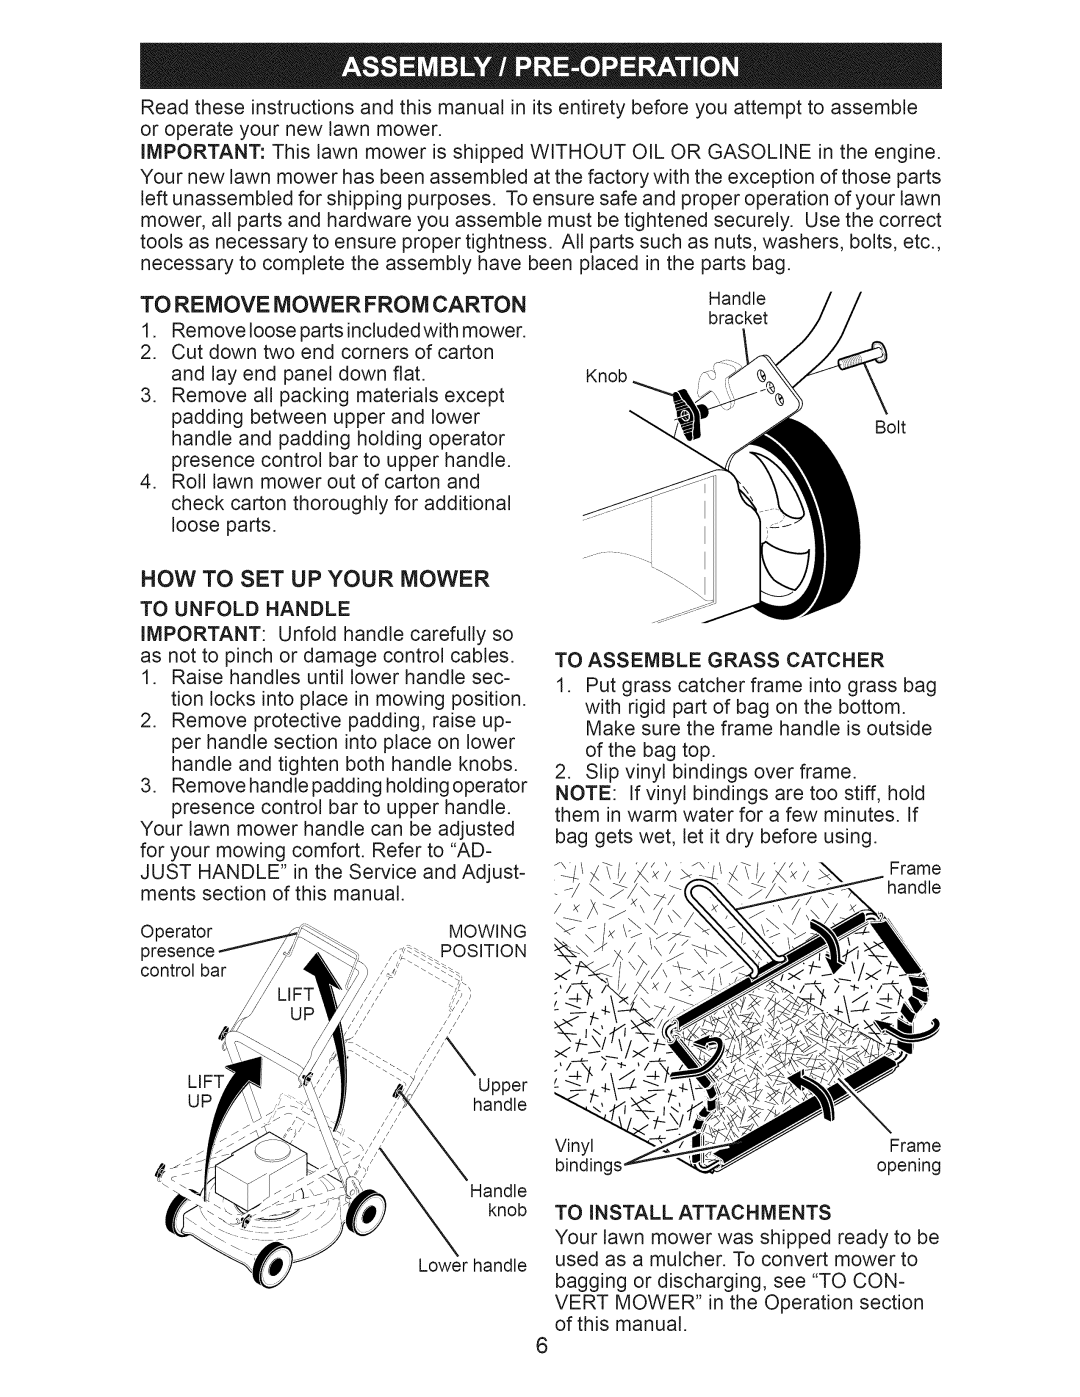 Craftsman 917.374043 owner manual To Remove Mower From Carton, Now To Set Up Your Mower 